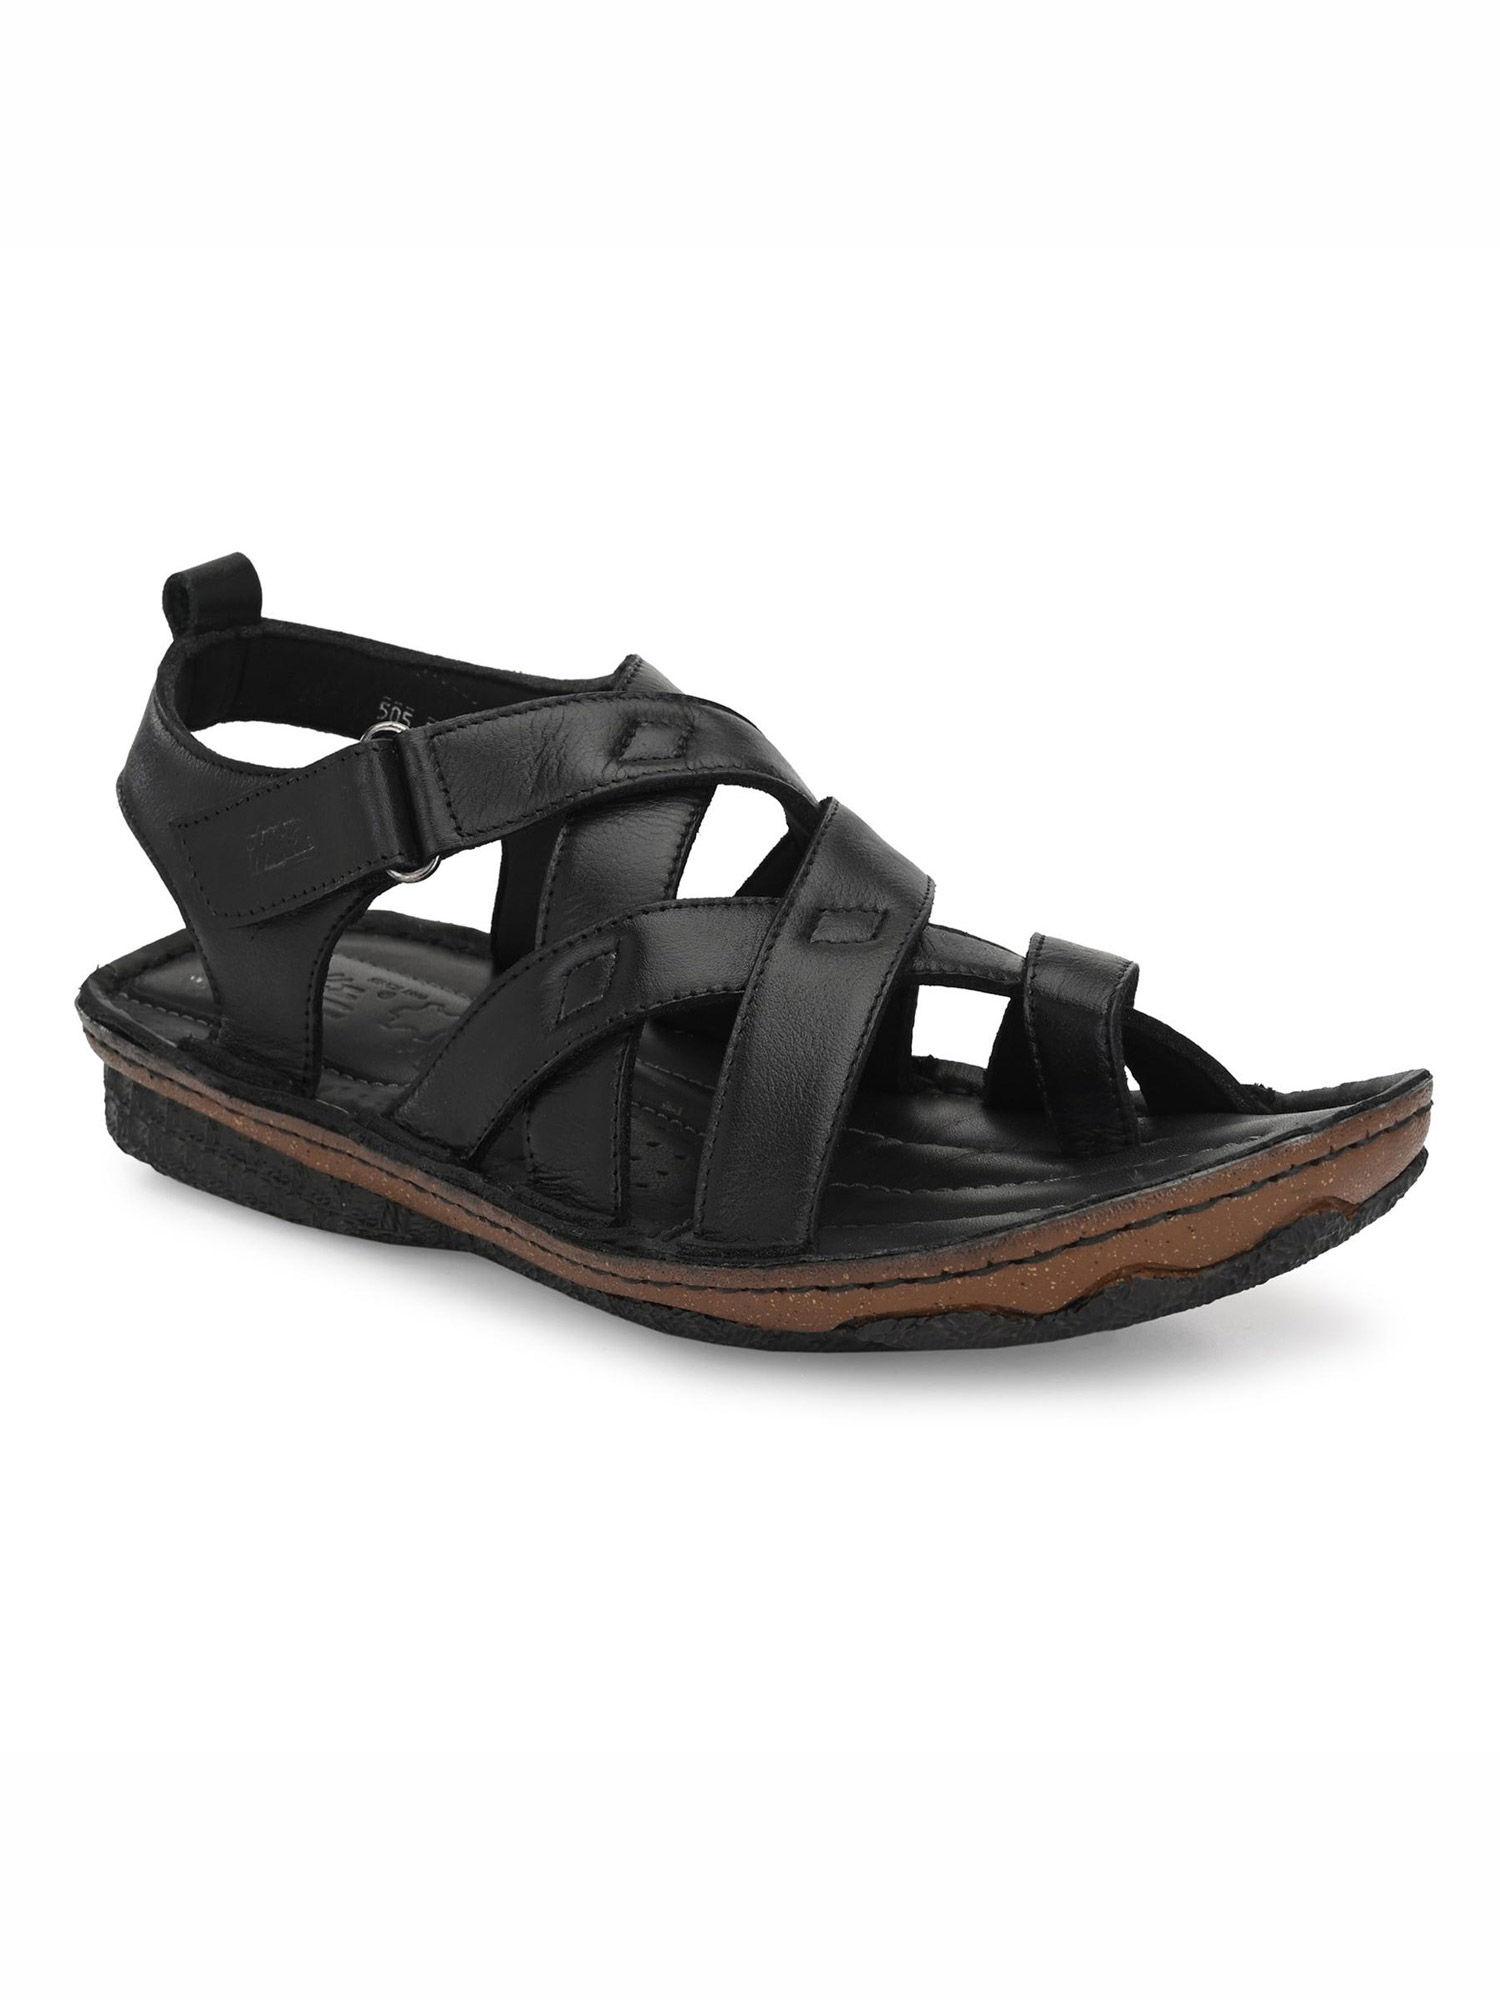 men's black leather toe ring sandals with velcro closure